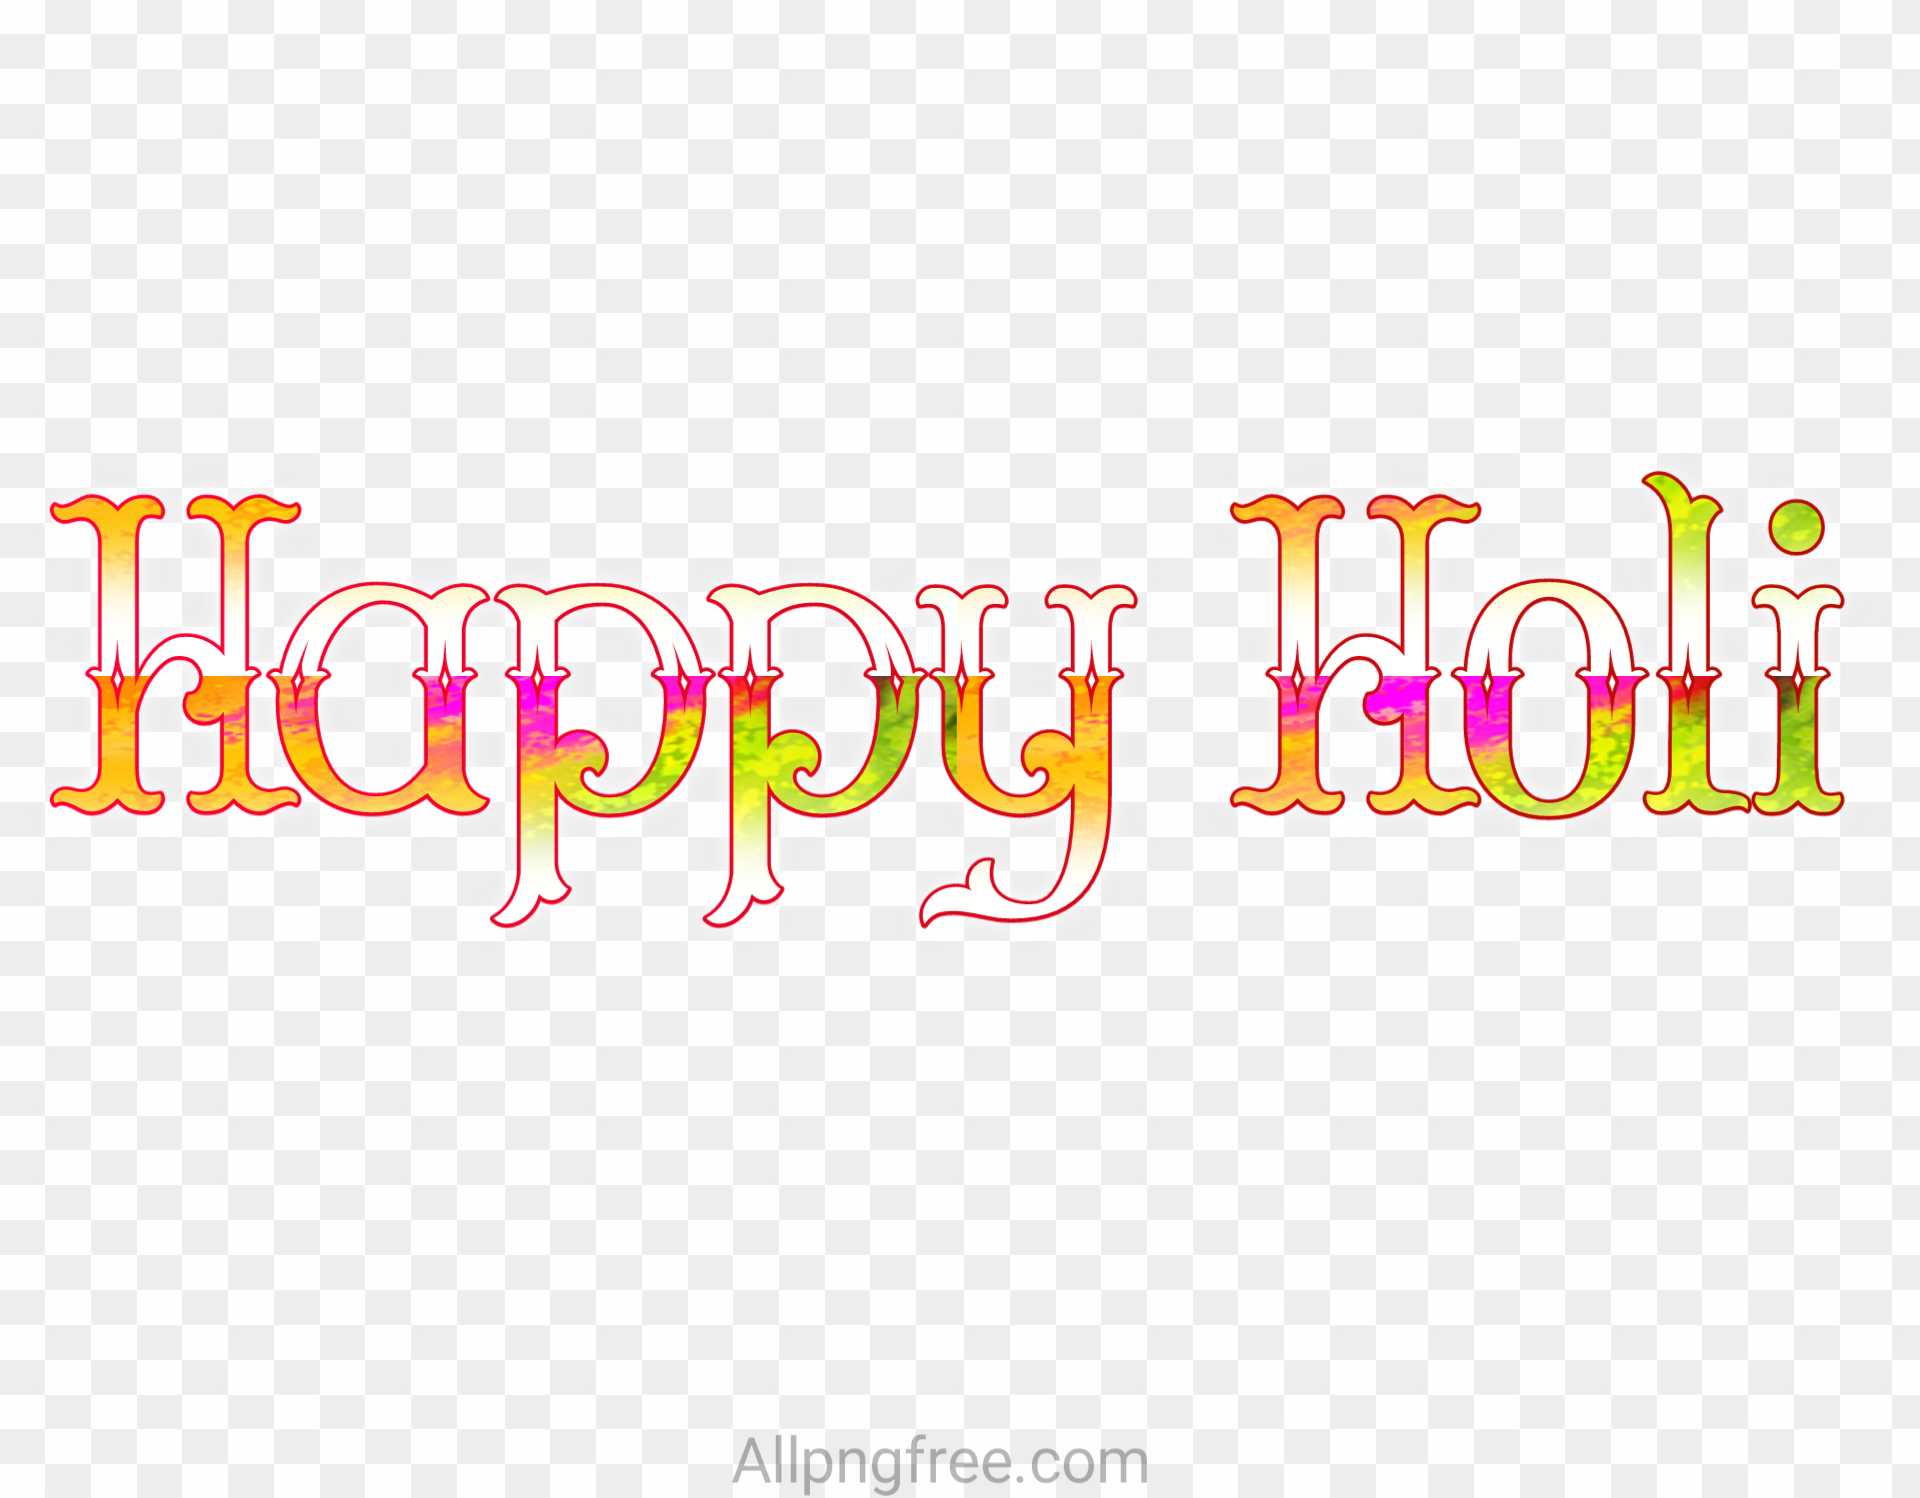 Happy holi text png